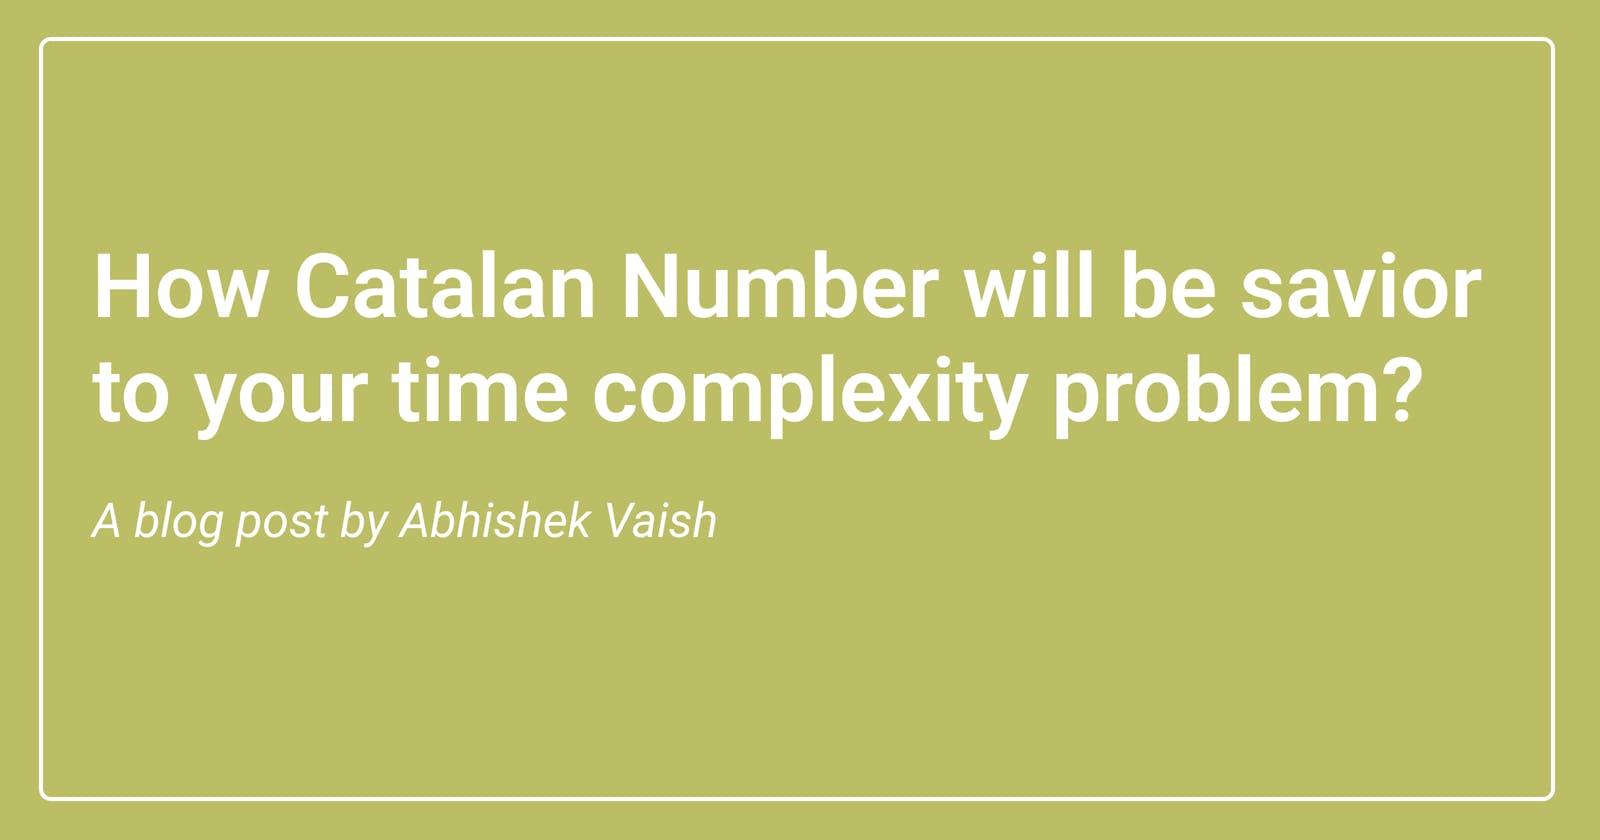 How Catalan Number will be savior to your time complexity problem?